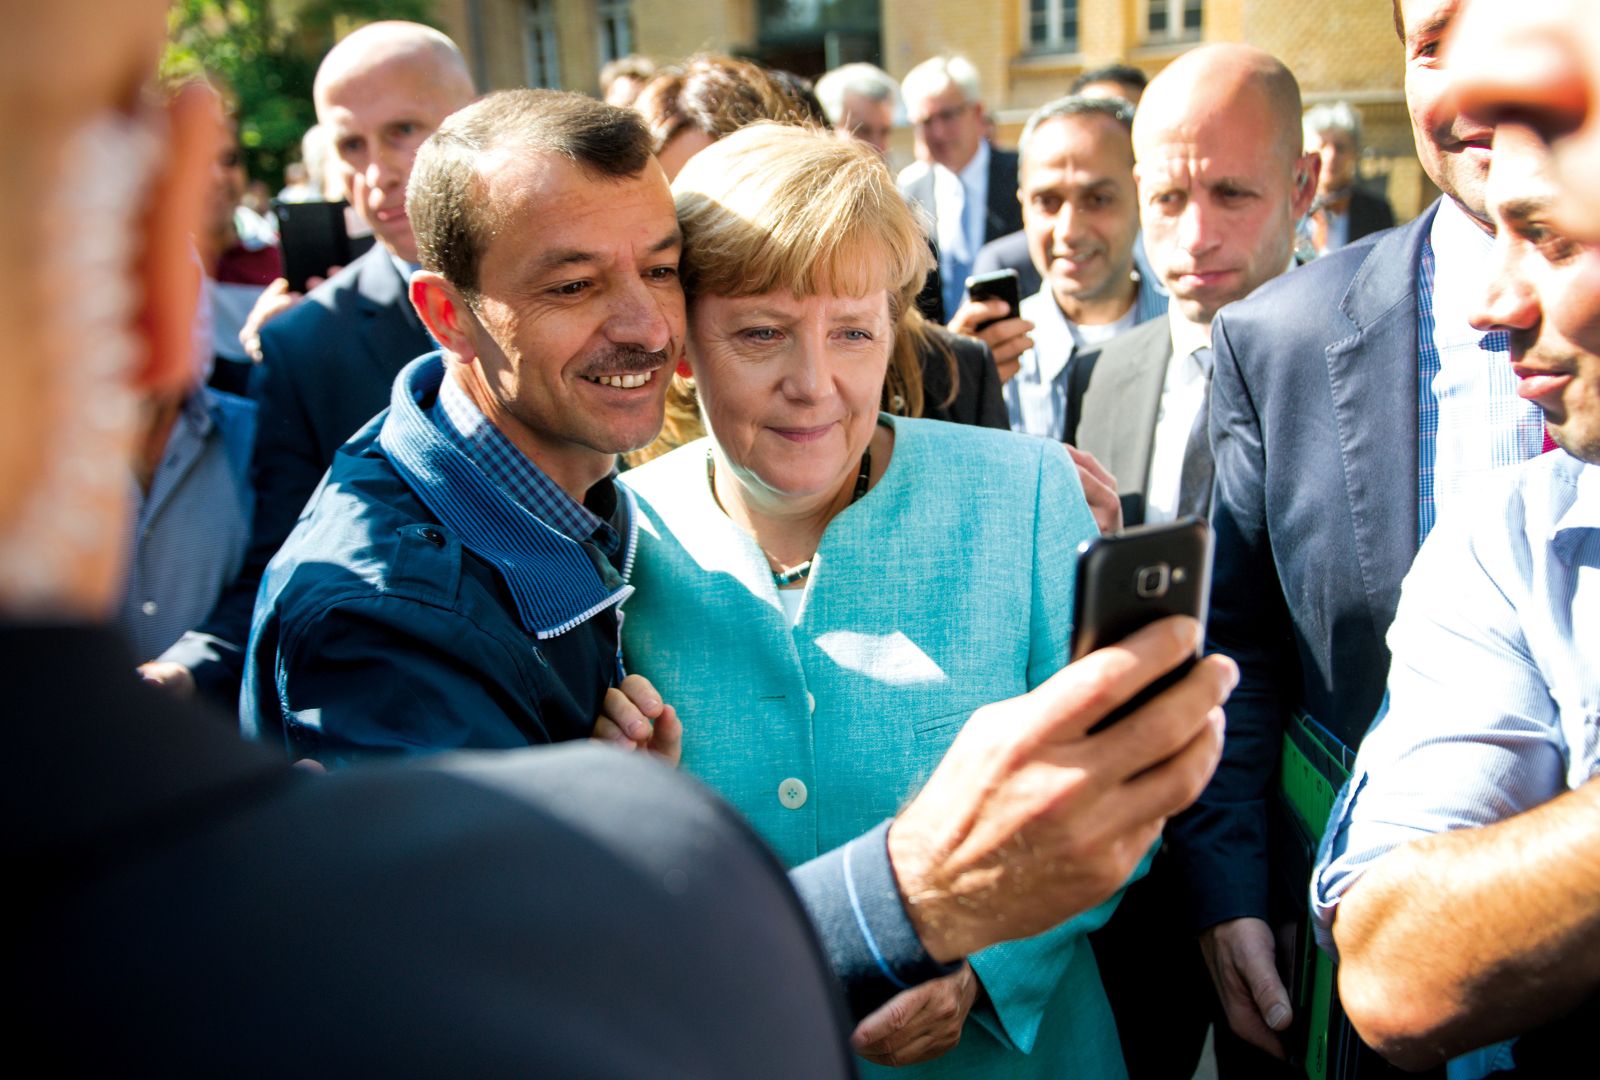 Images like this one have boosted Germany’s reputation: a refugee taking a selfie with chancellor Angela Merkel.